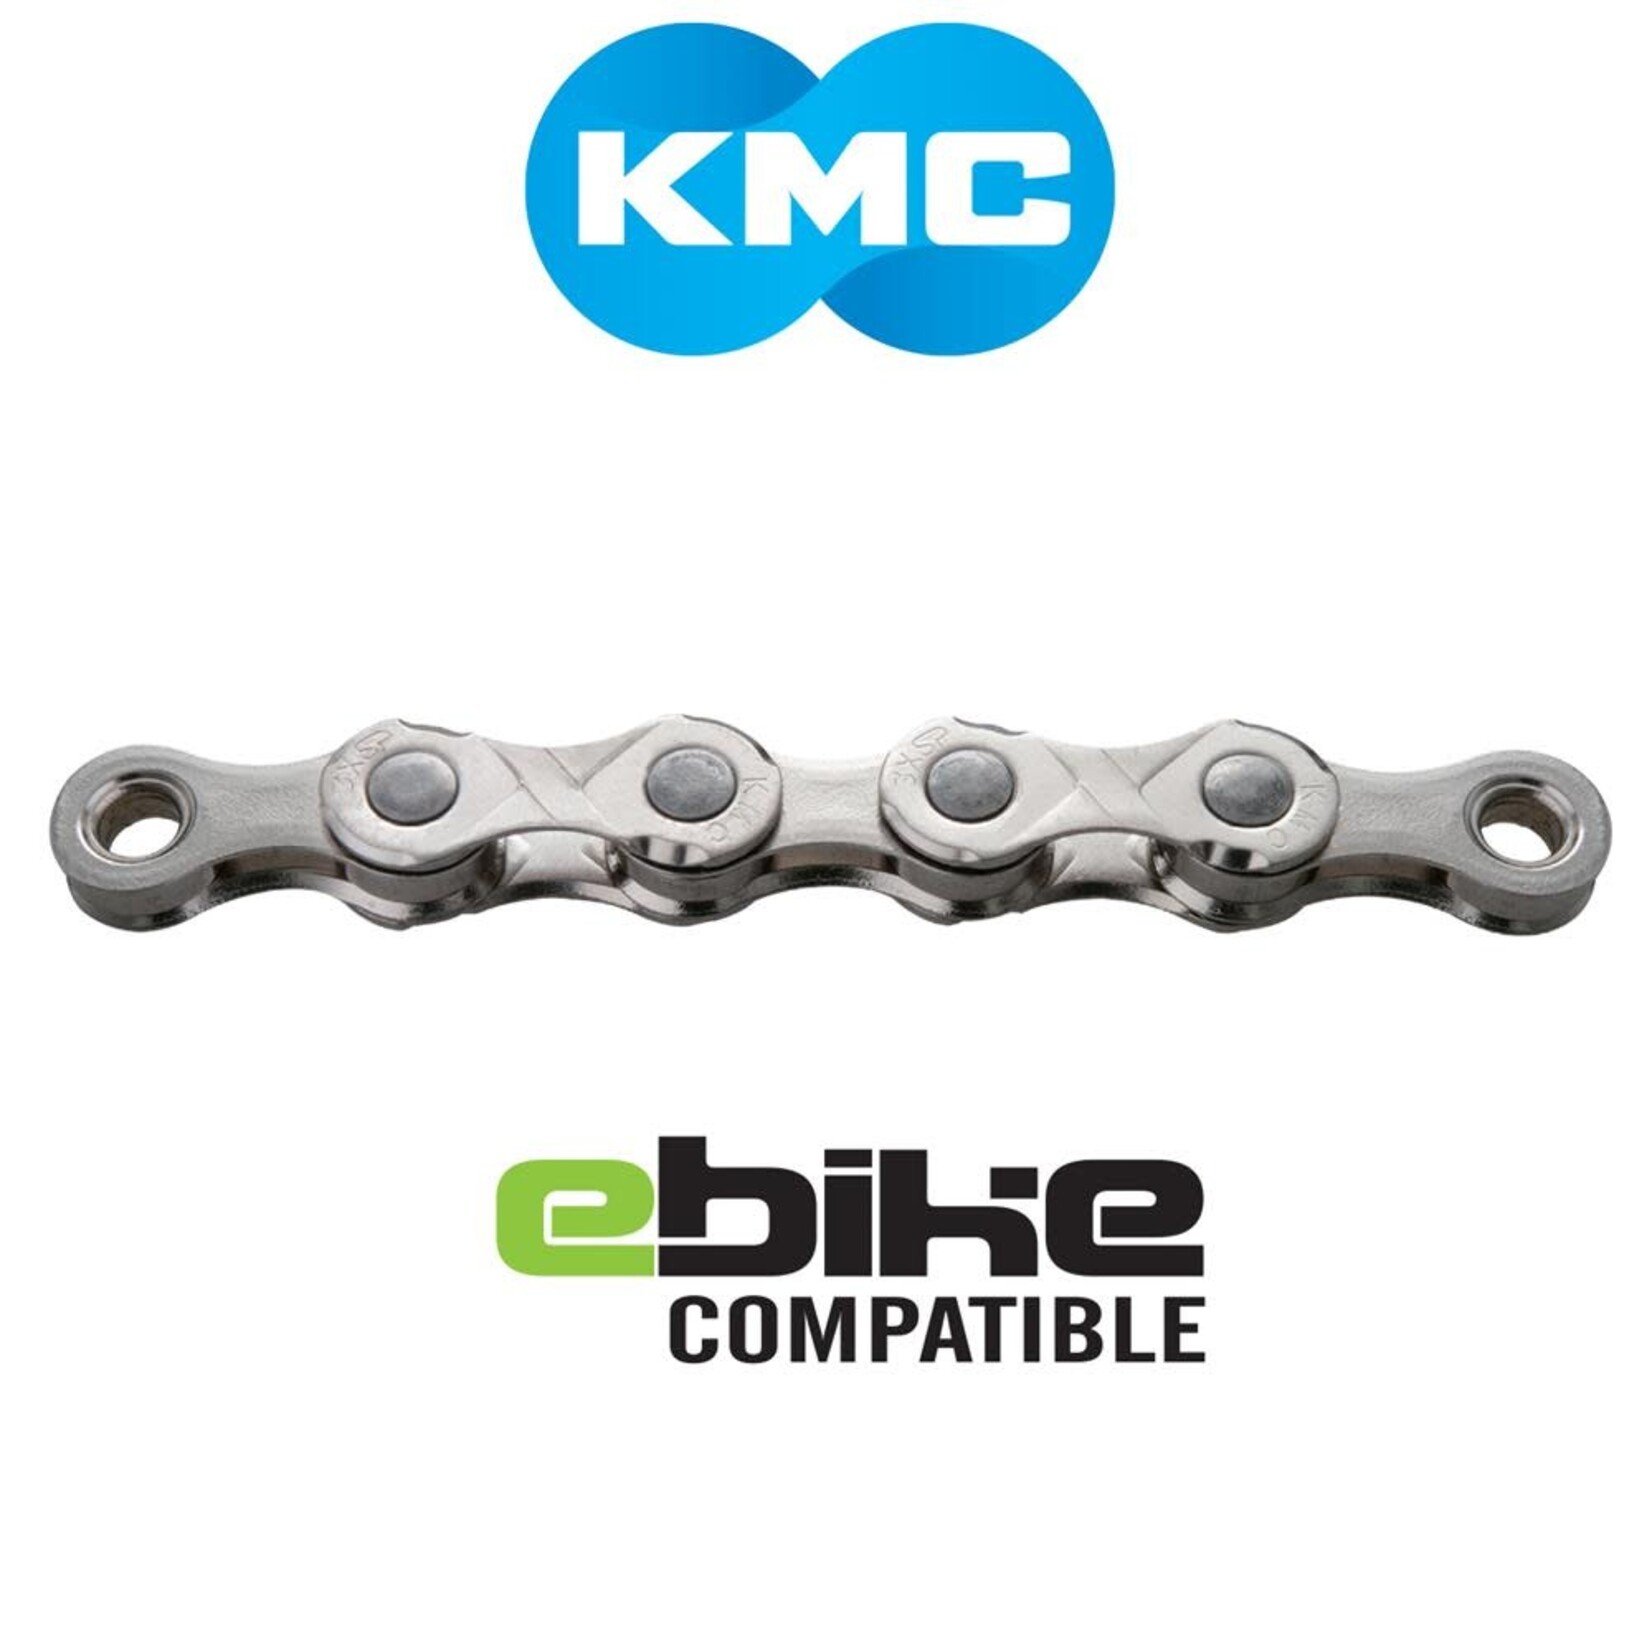 KMC e11 Chain for 11sp eBikes (122 Links)